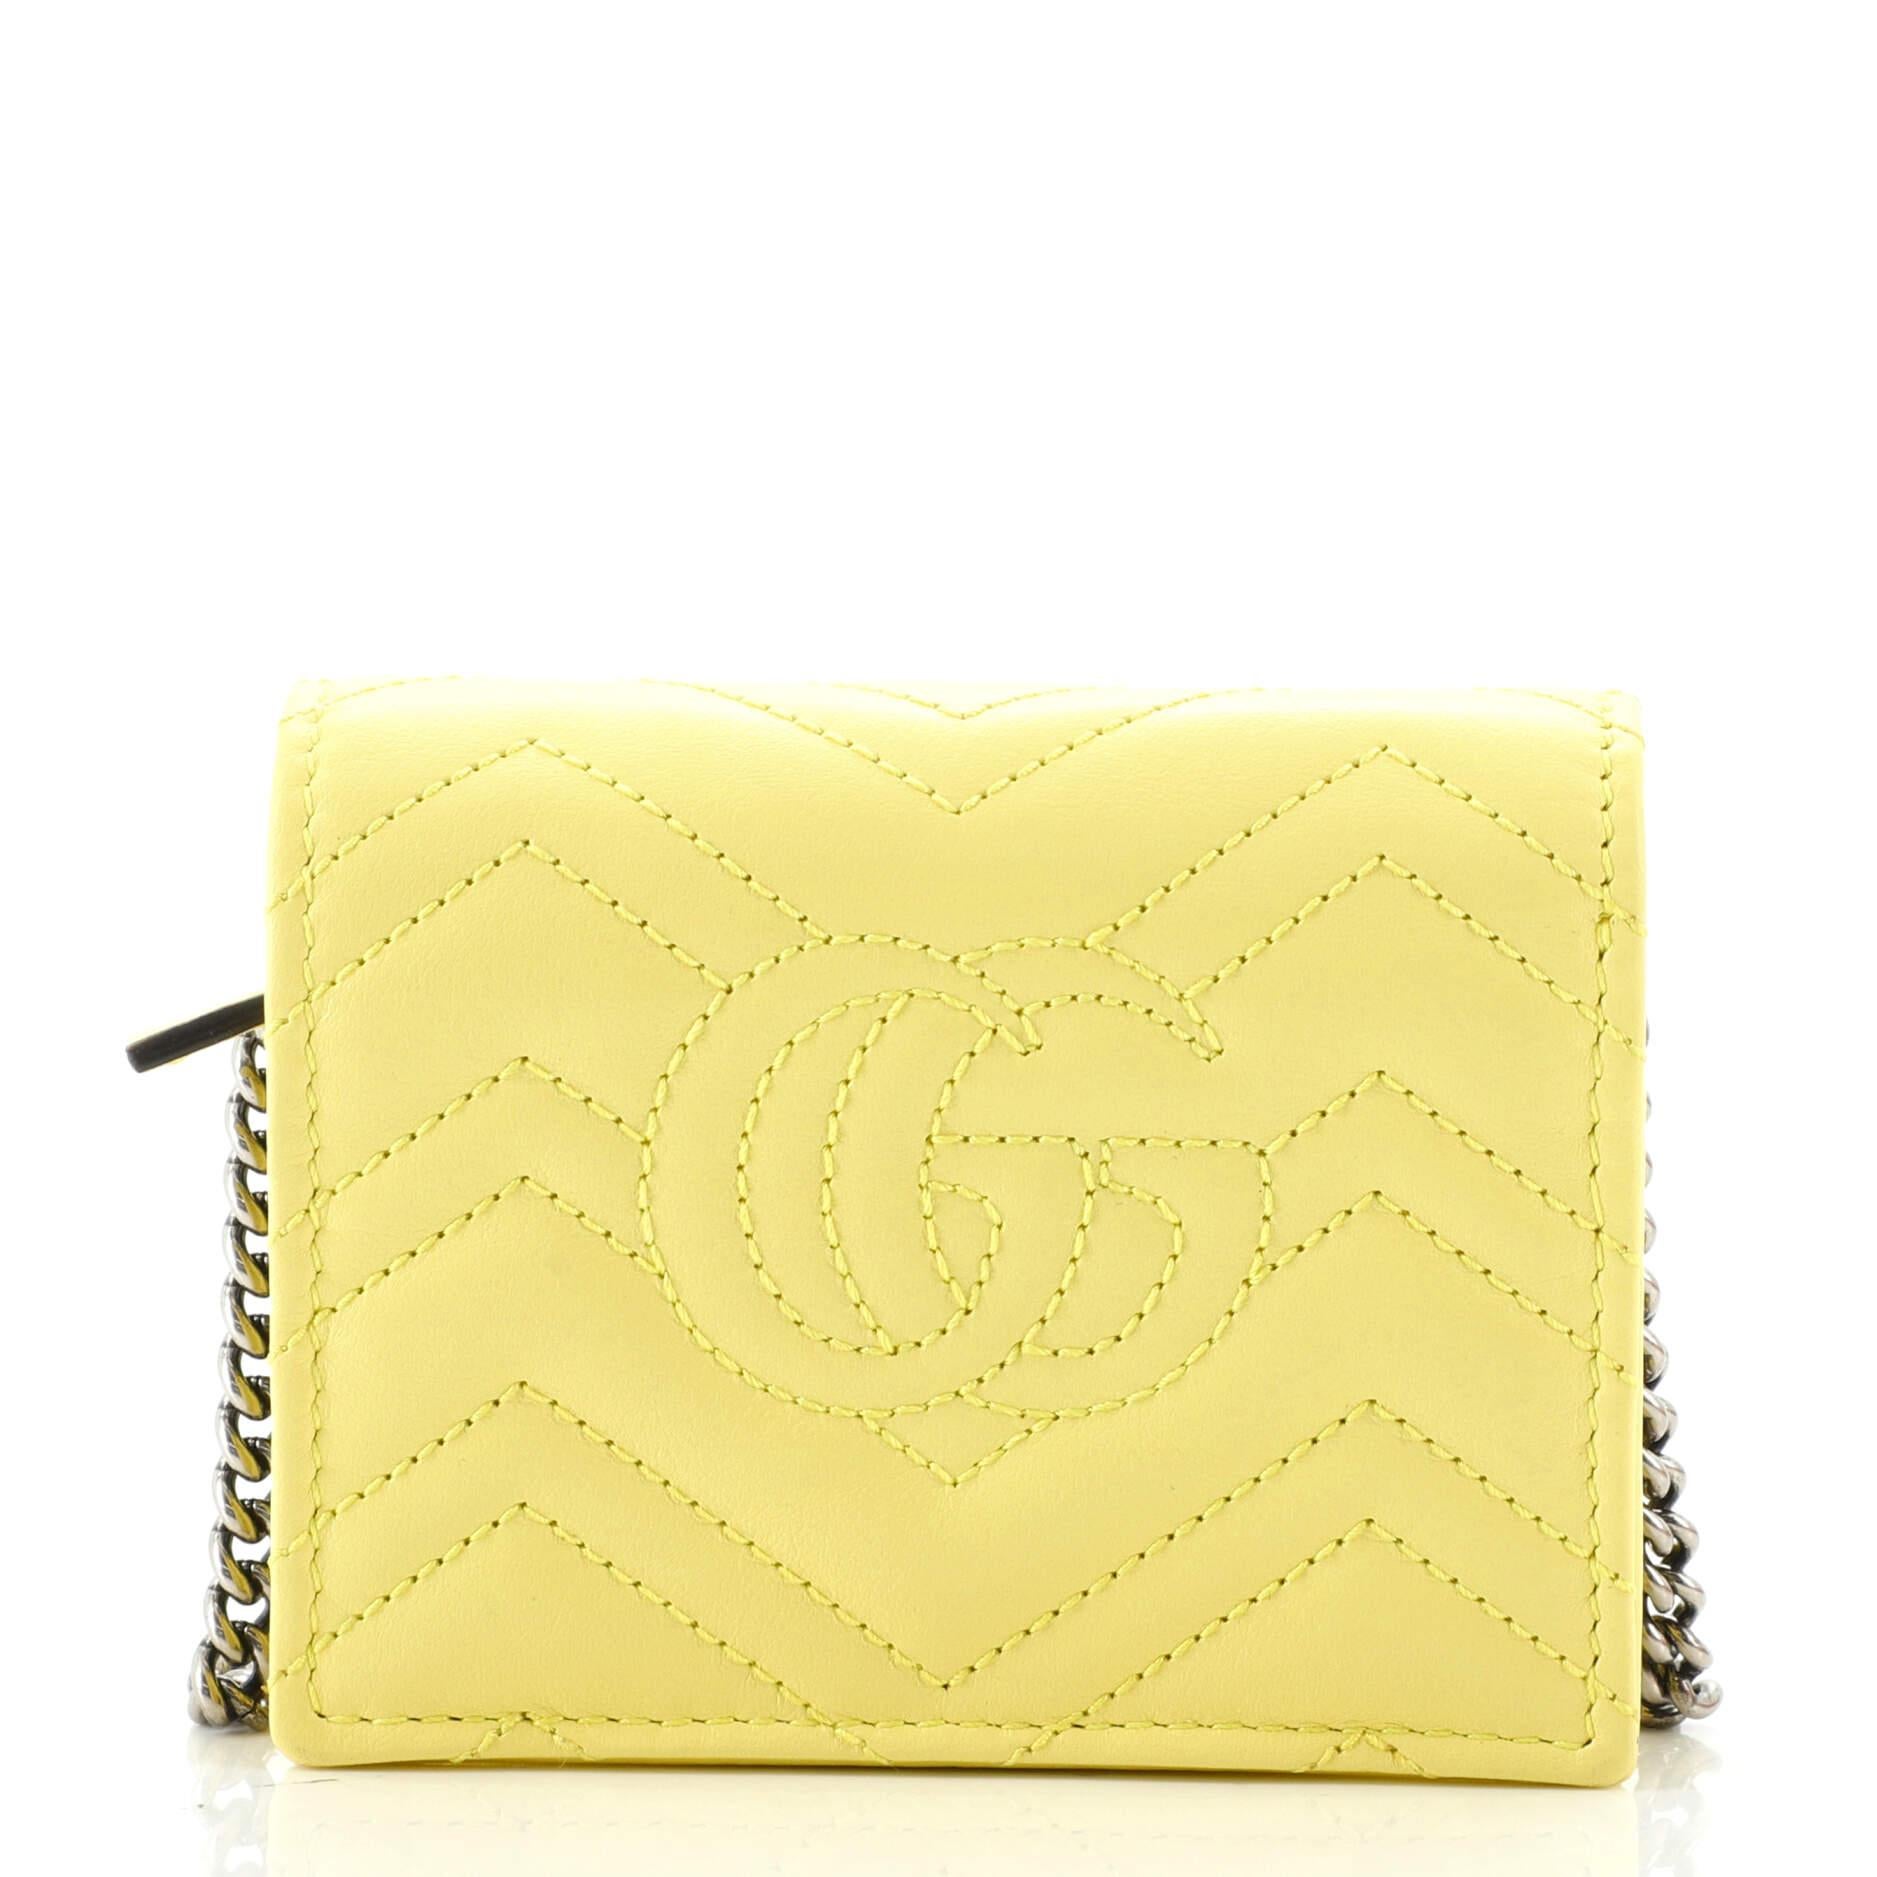 gg marmont card case wallet with chain